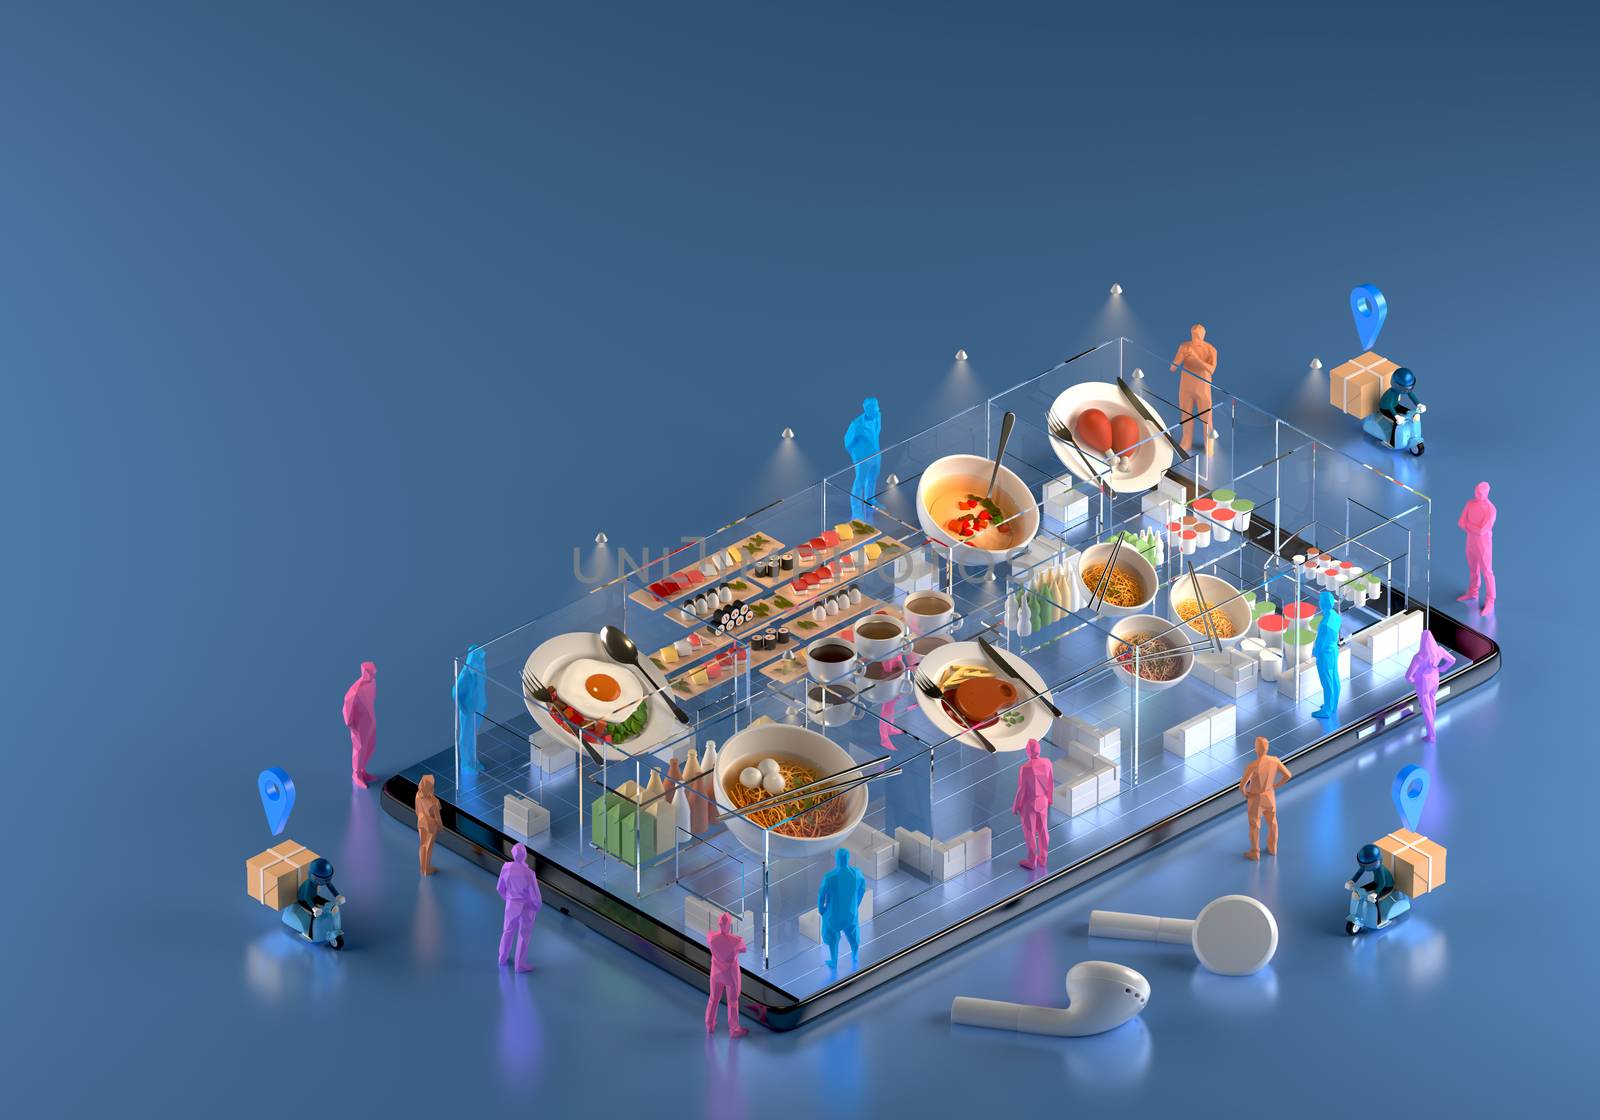 restaurant online store order applications from smartphones. food menu app shop. people shopping from home buys and delivery. social distancing digital lifestyle. tracking GPS network. 3d illustrator.